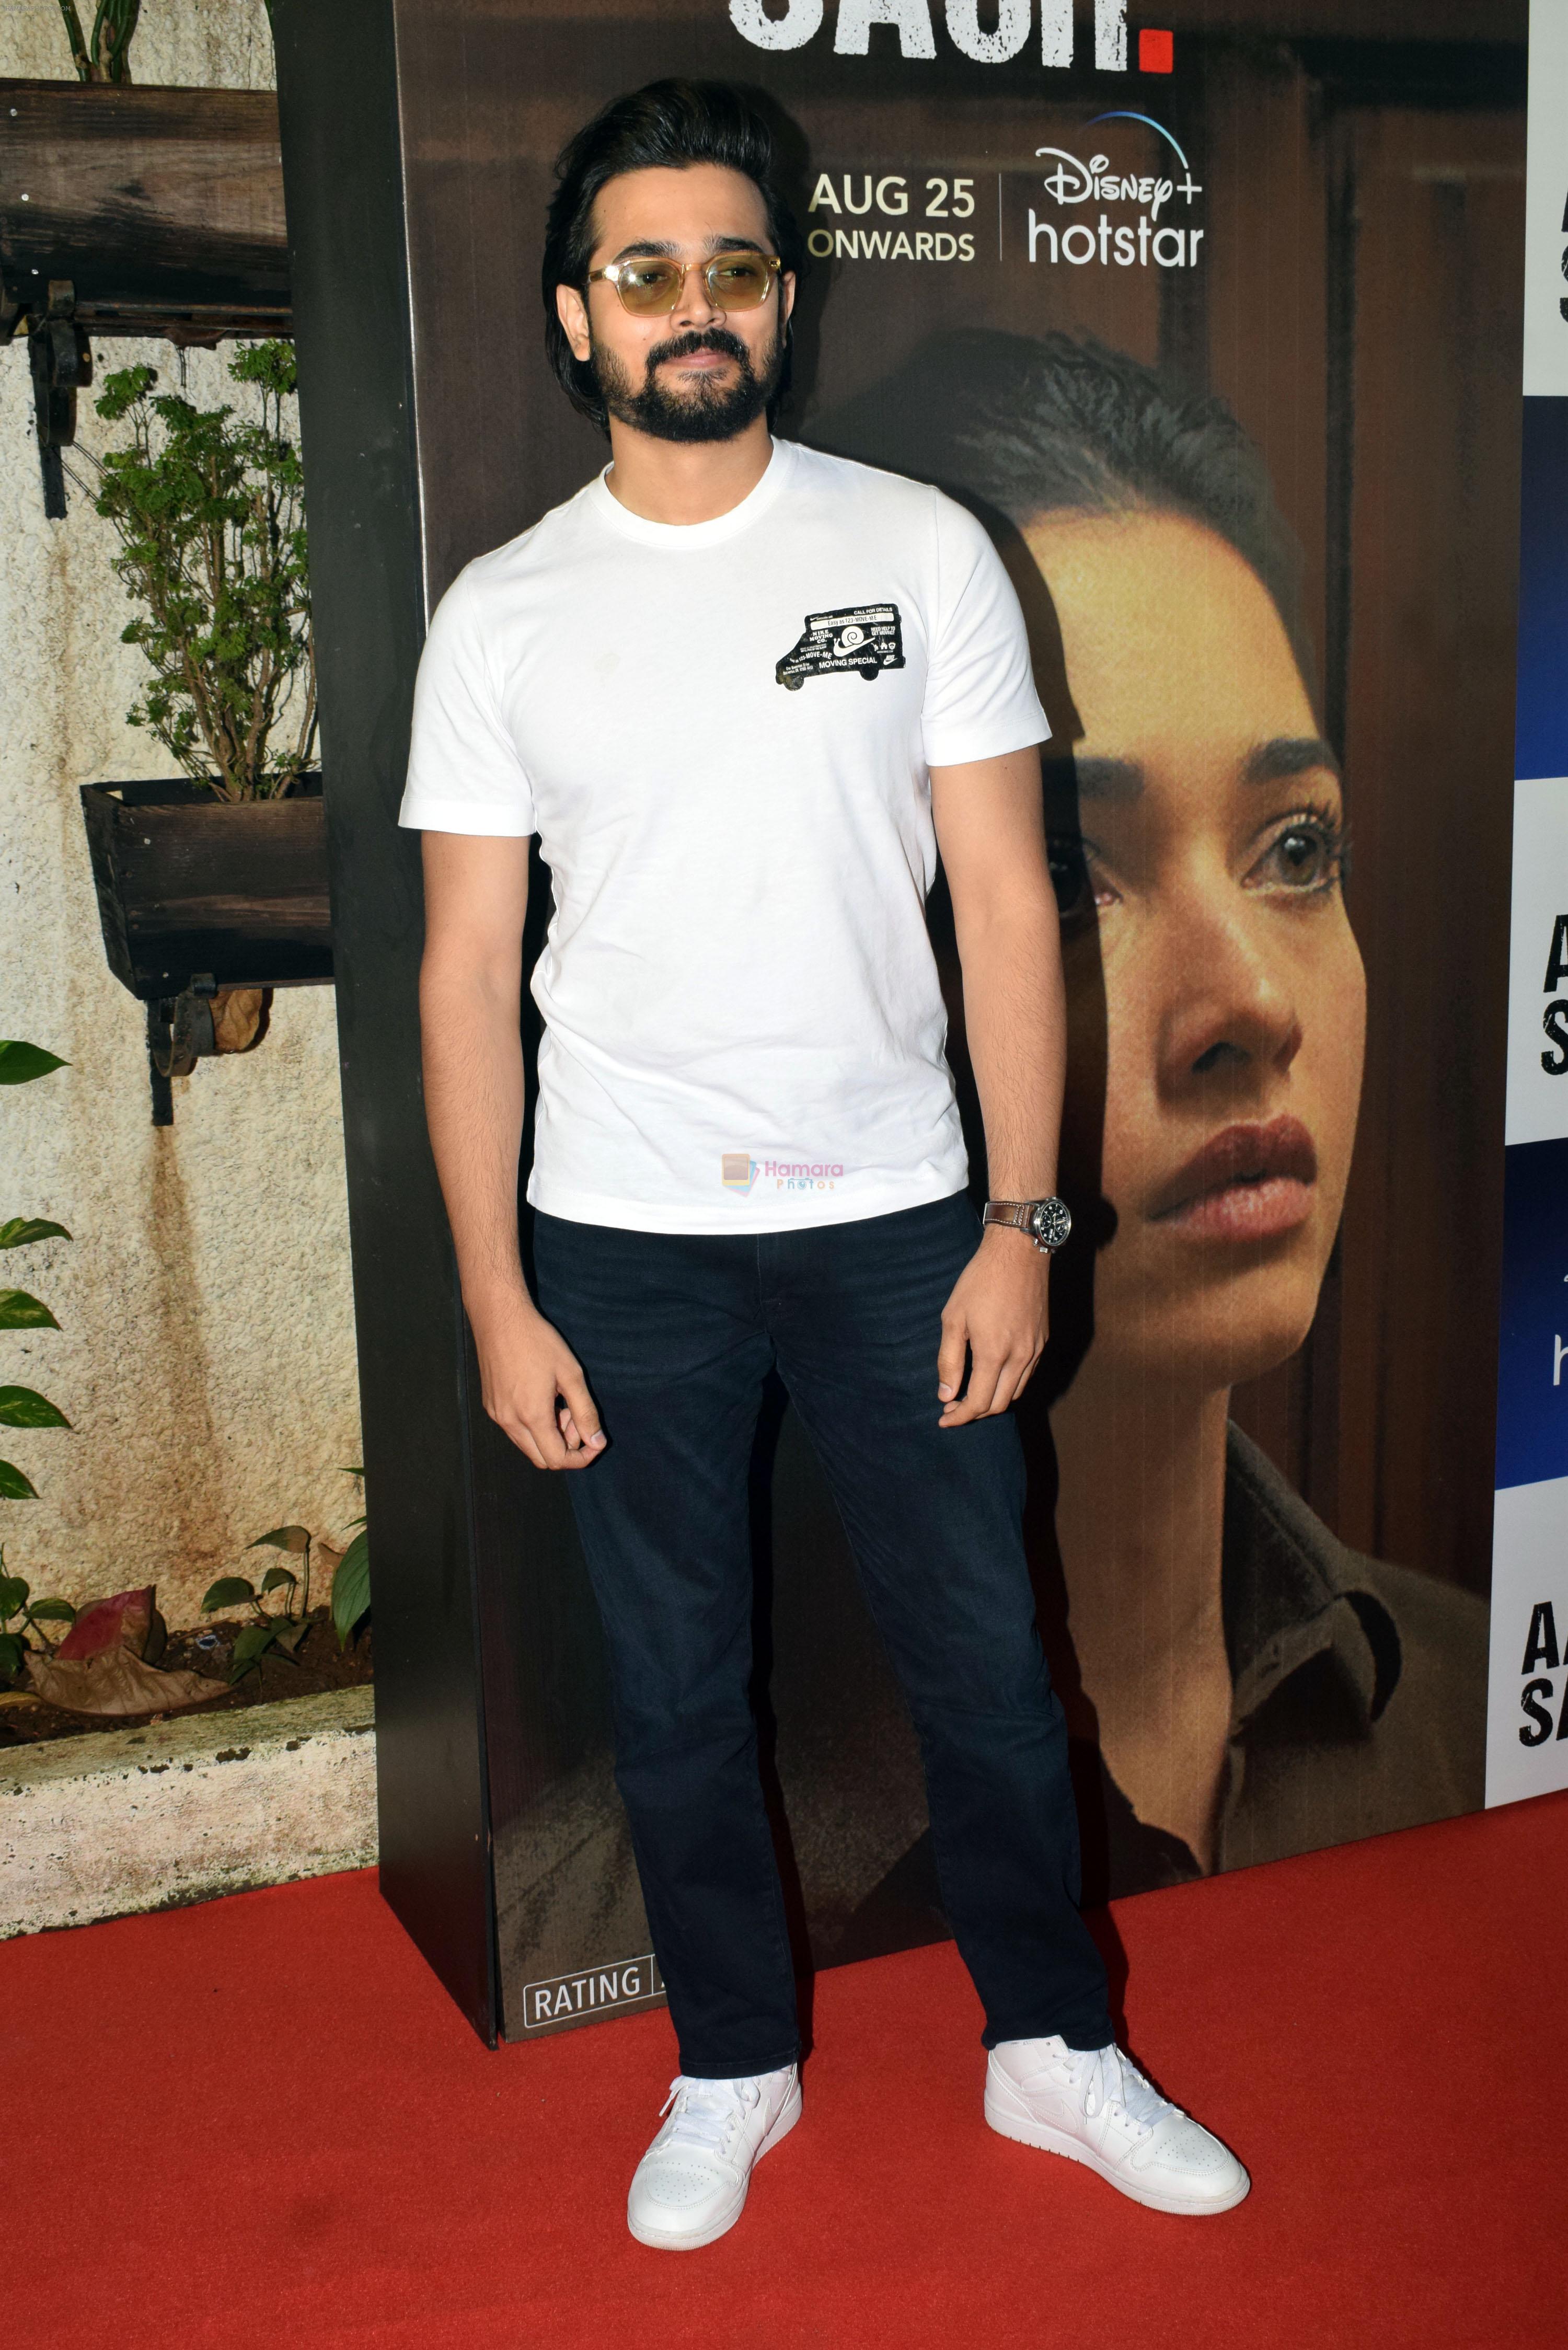 Bhuvan Bam at the premiere of Aakhri Sach series